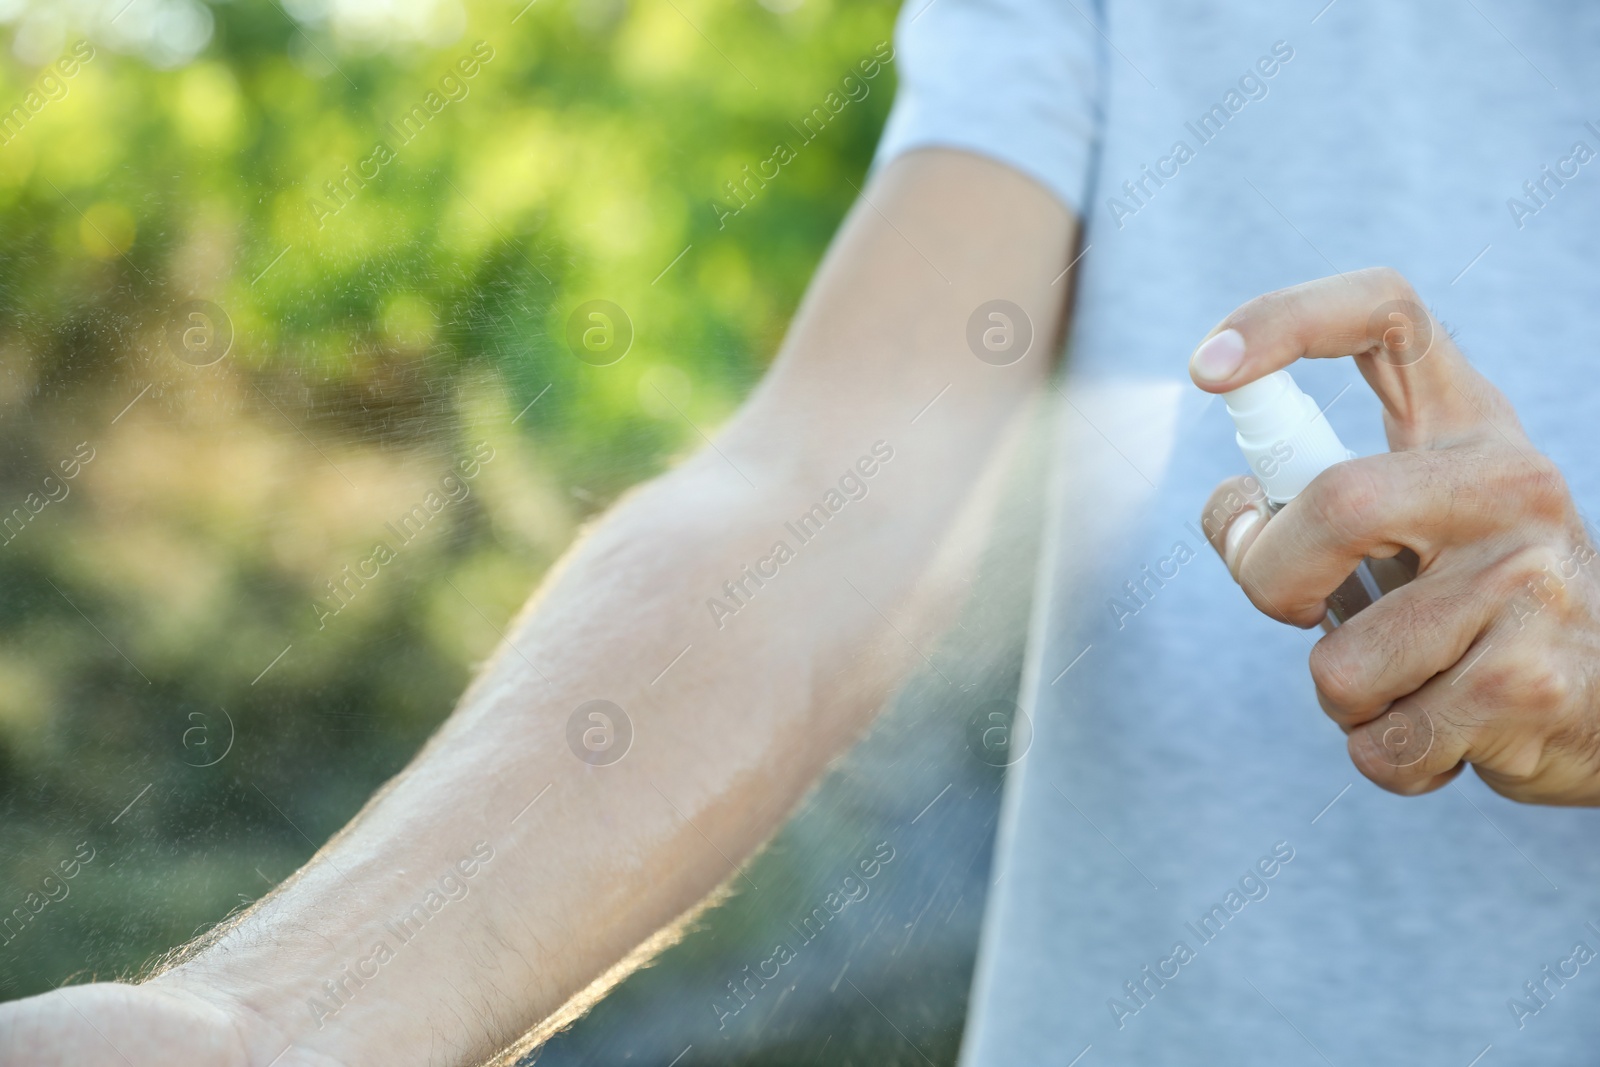 Photo of Man applying insect repellent onto arm outdoors, closeup